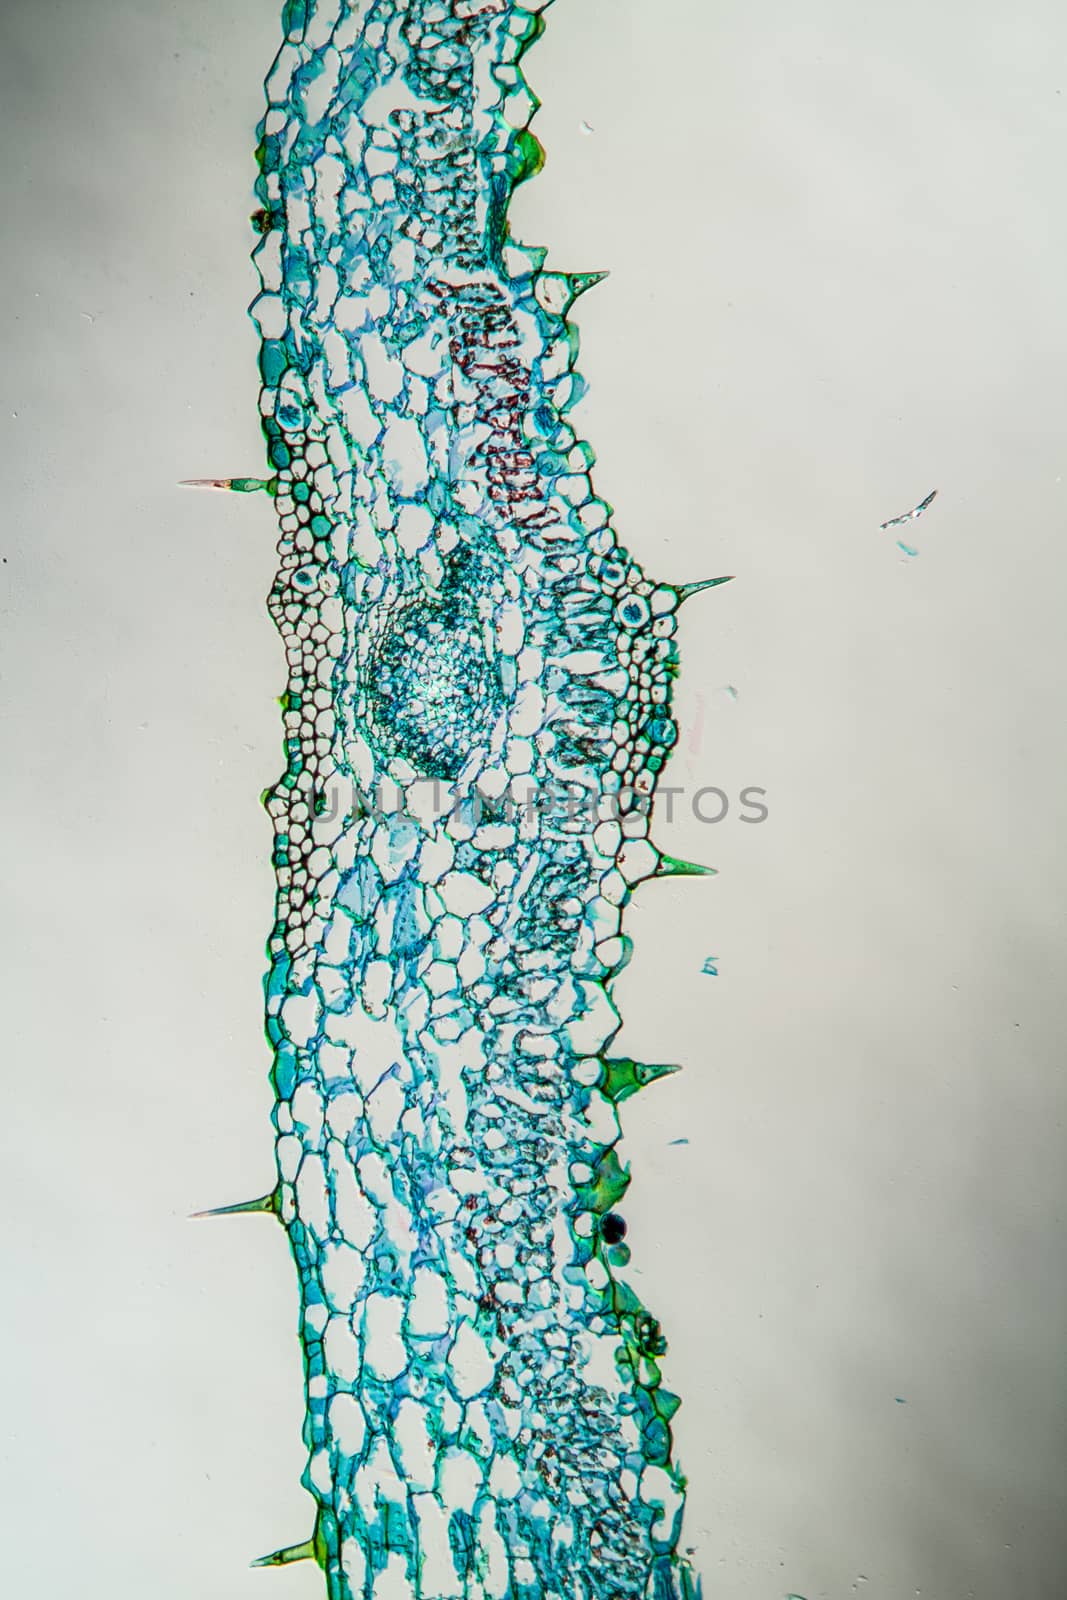 Hogweed with leaves in cross section 100x by Dr-Lange